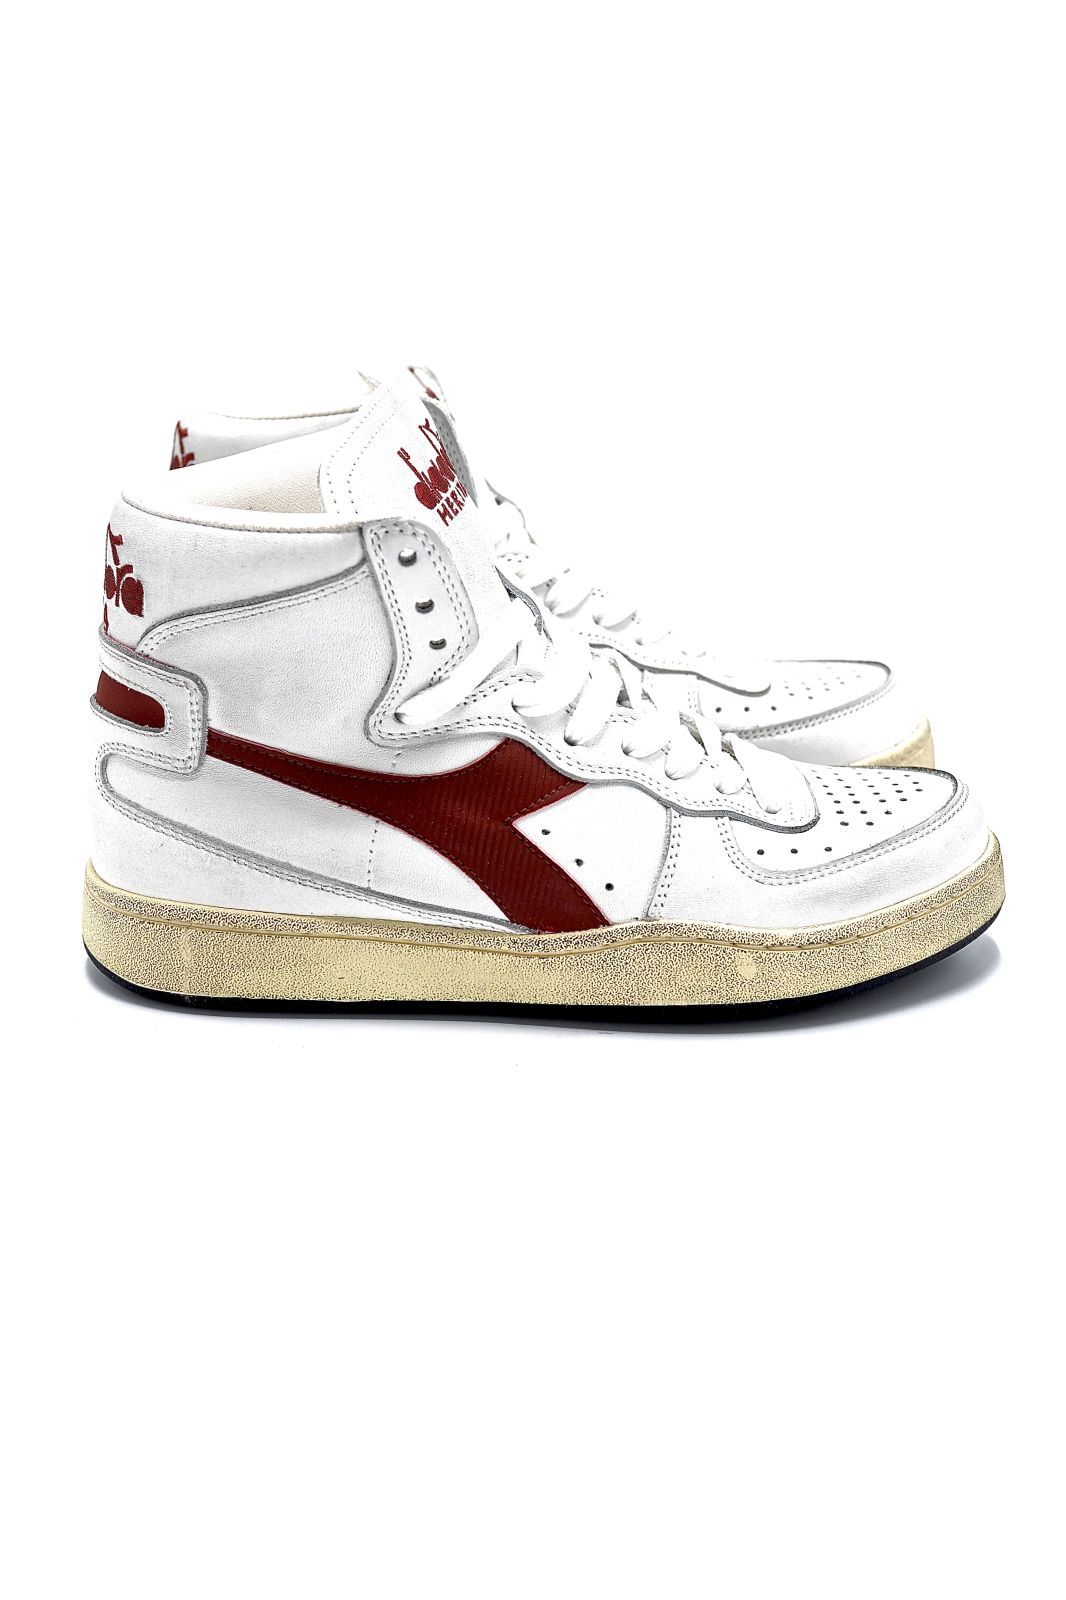 Diadora basket haut Blanc femmes (DIAD-Heritage Mid - 158569 MID + rouge) - Marine | Much more than shoes